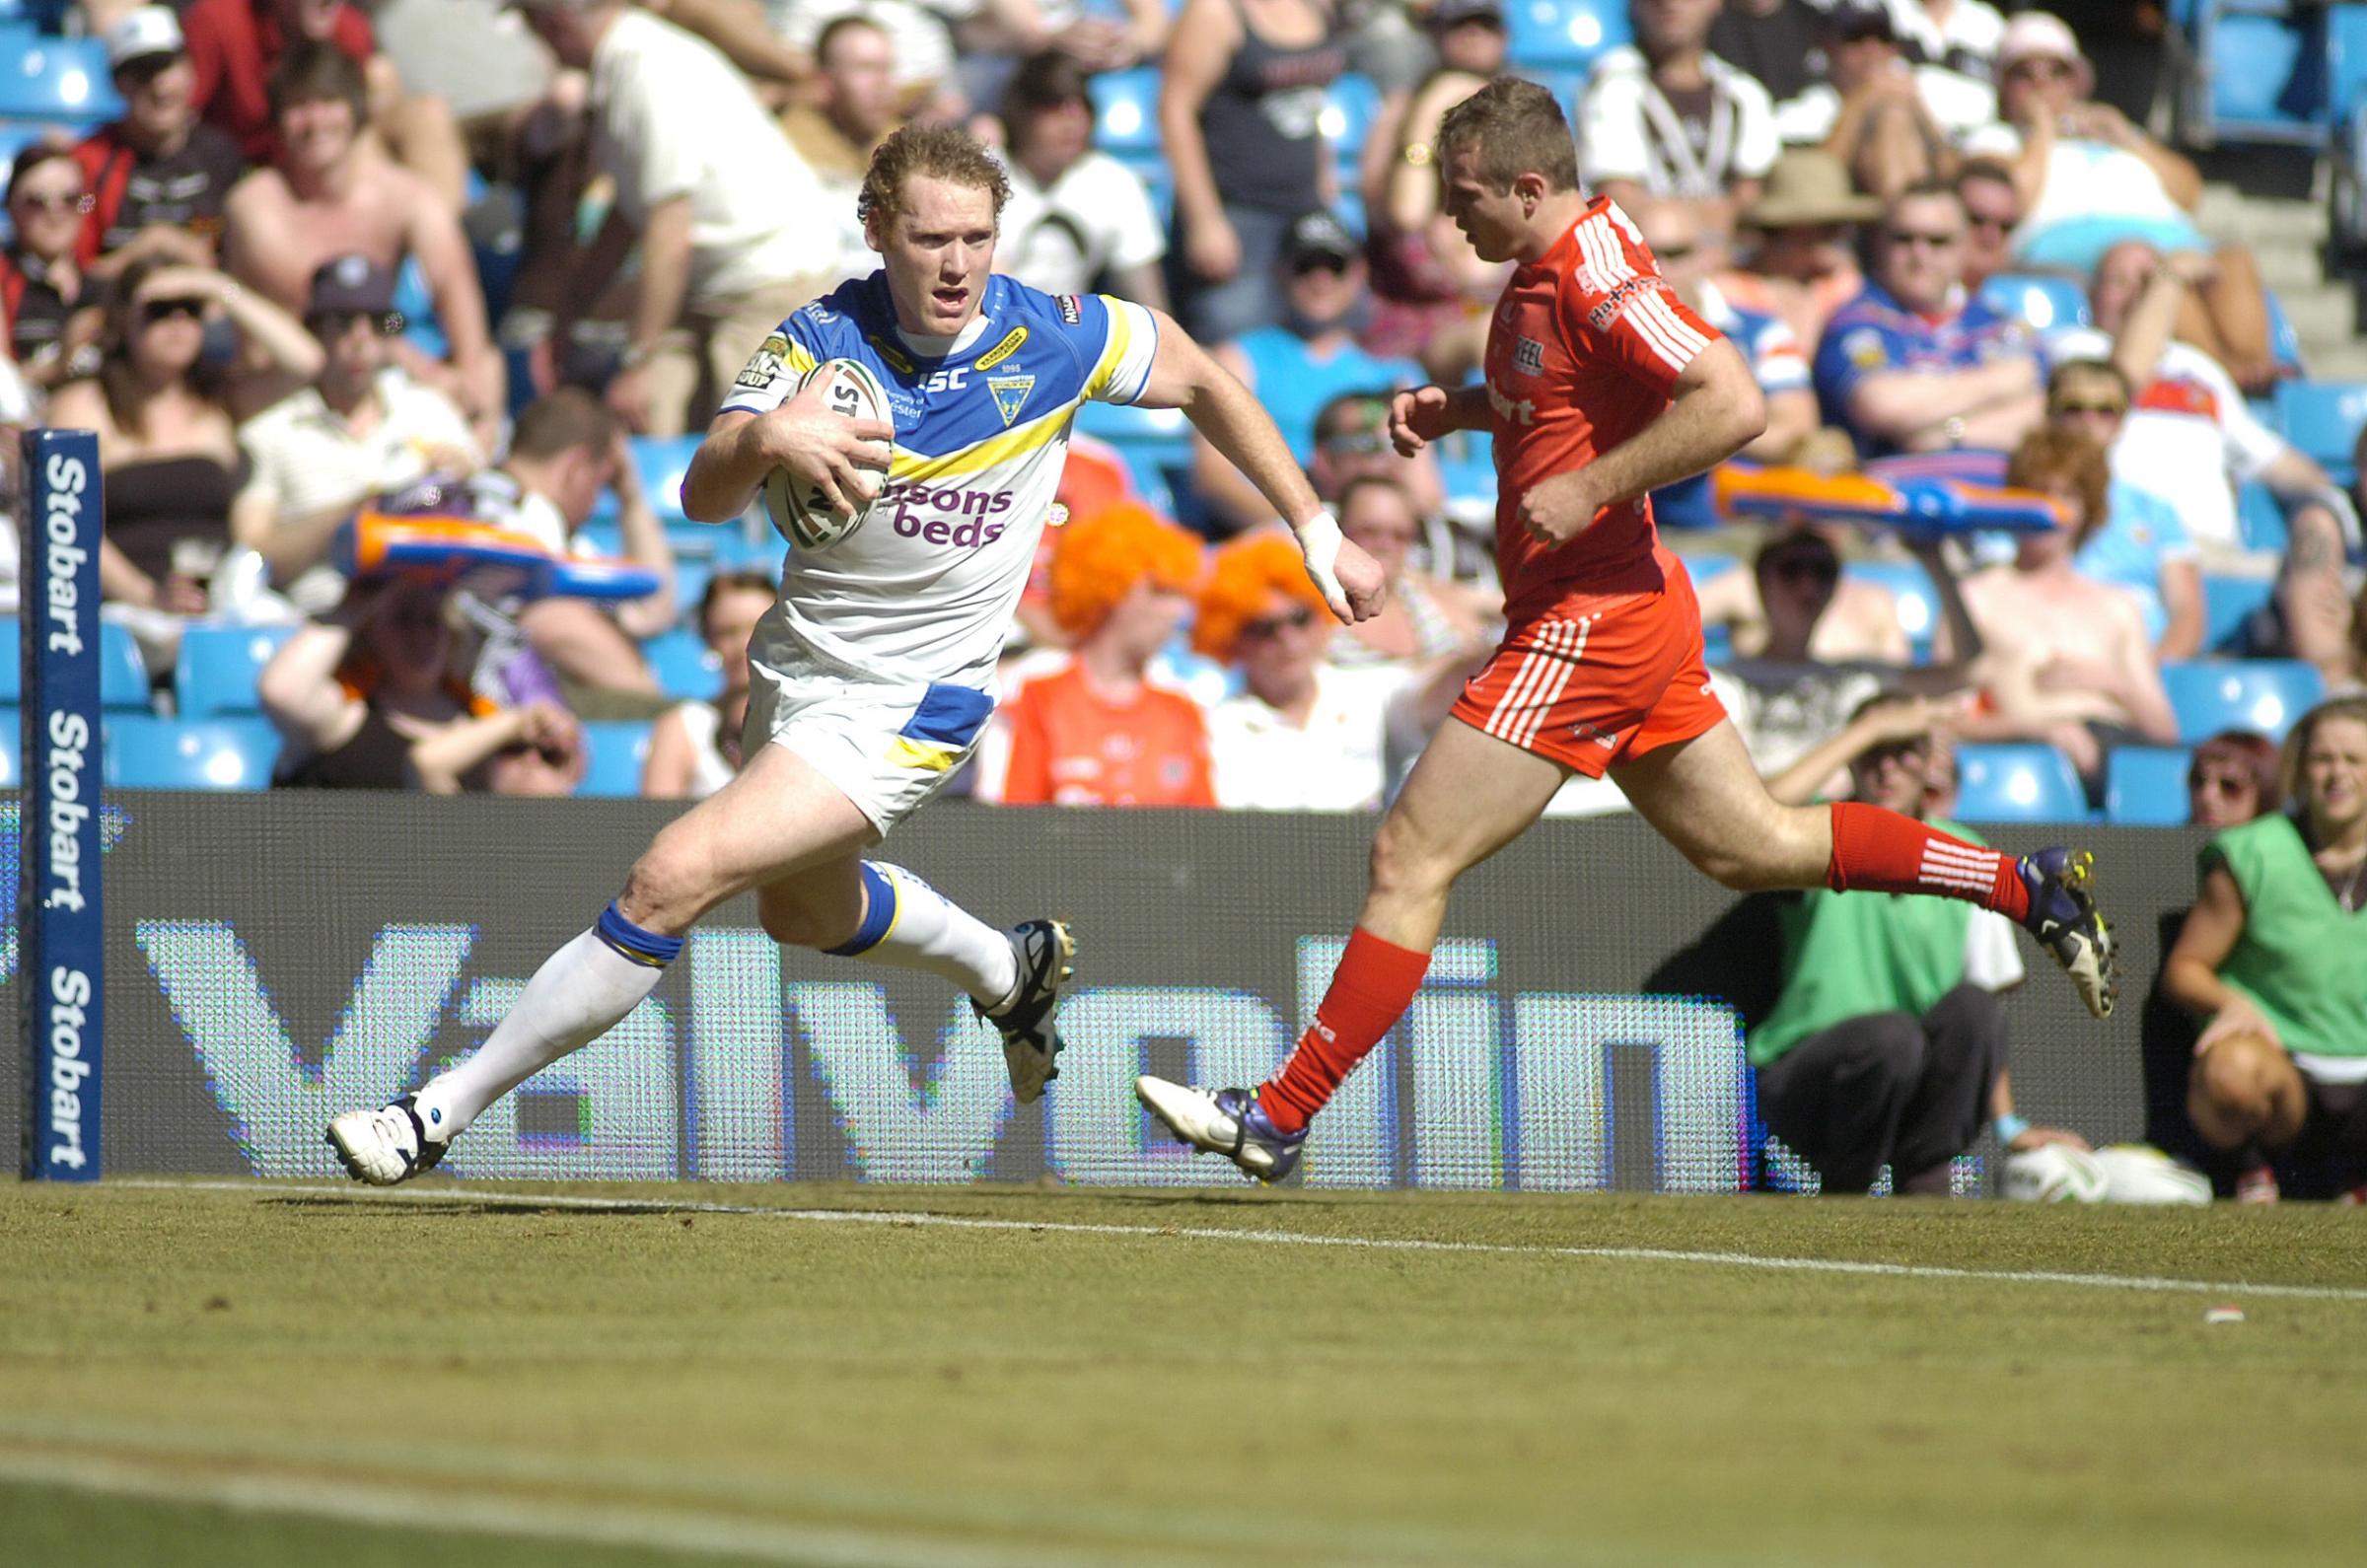 Joel Monaghan scores one of his five tries as Widnes were thrashed at the 2012 Magic Weekend. Picture by Mike Boden